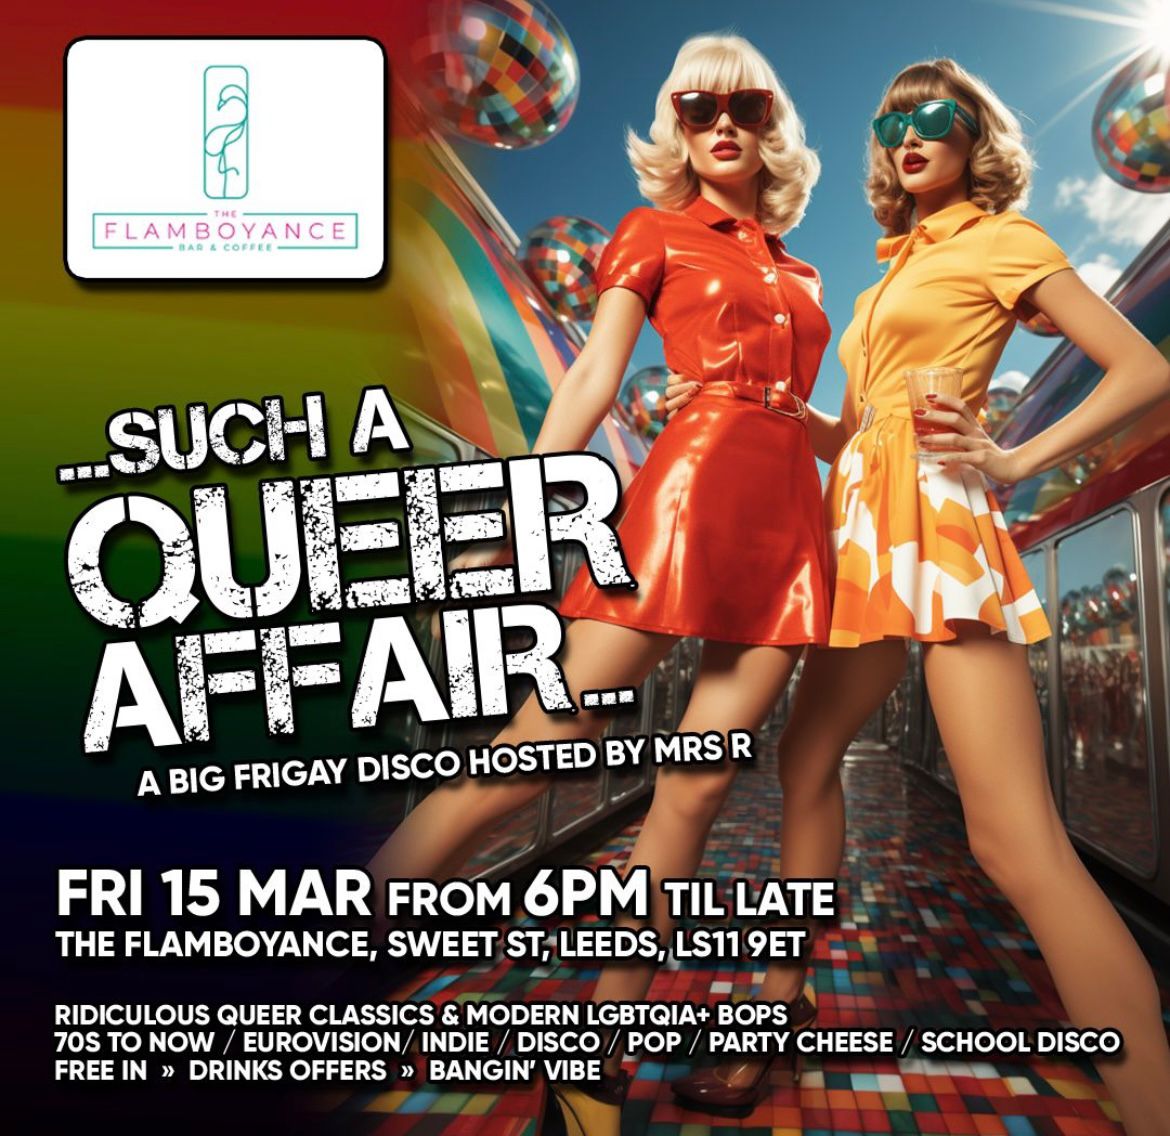 Join A Big Friday Disco in Leeds Fri 15 Mar 6pm til LATE Such a Queer Affair At The Flamboyance Bar in Leeds on Sweet Street #BigFridayDisco